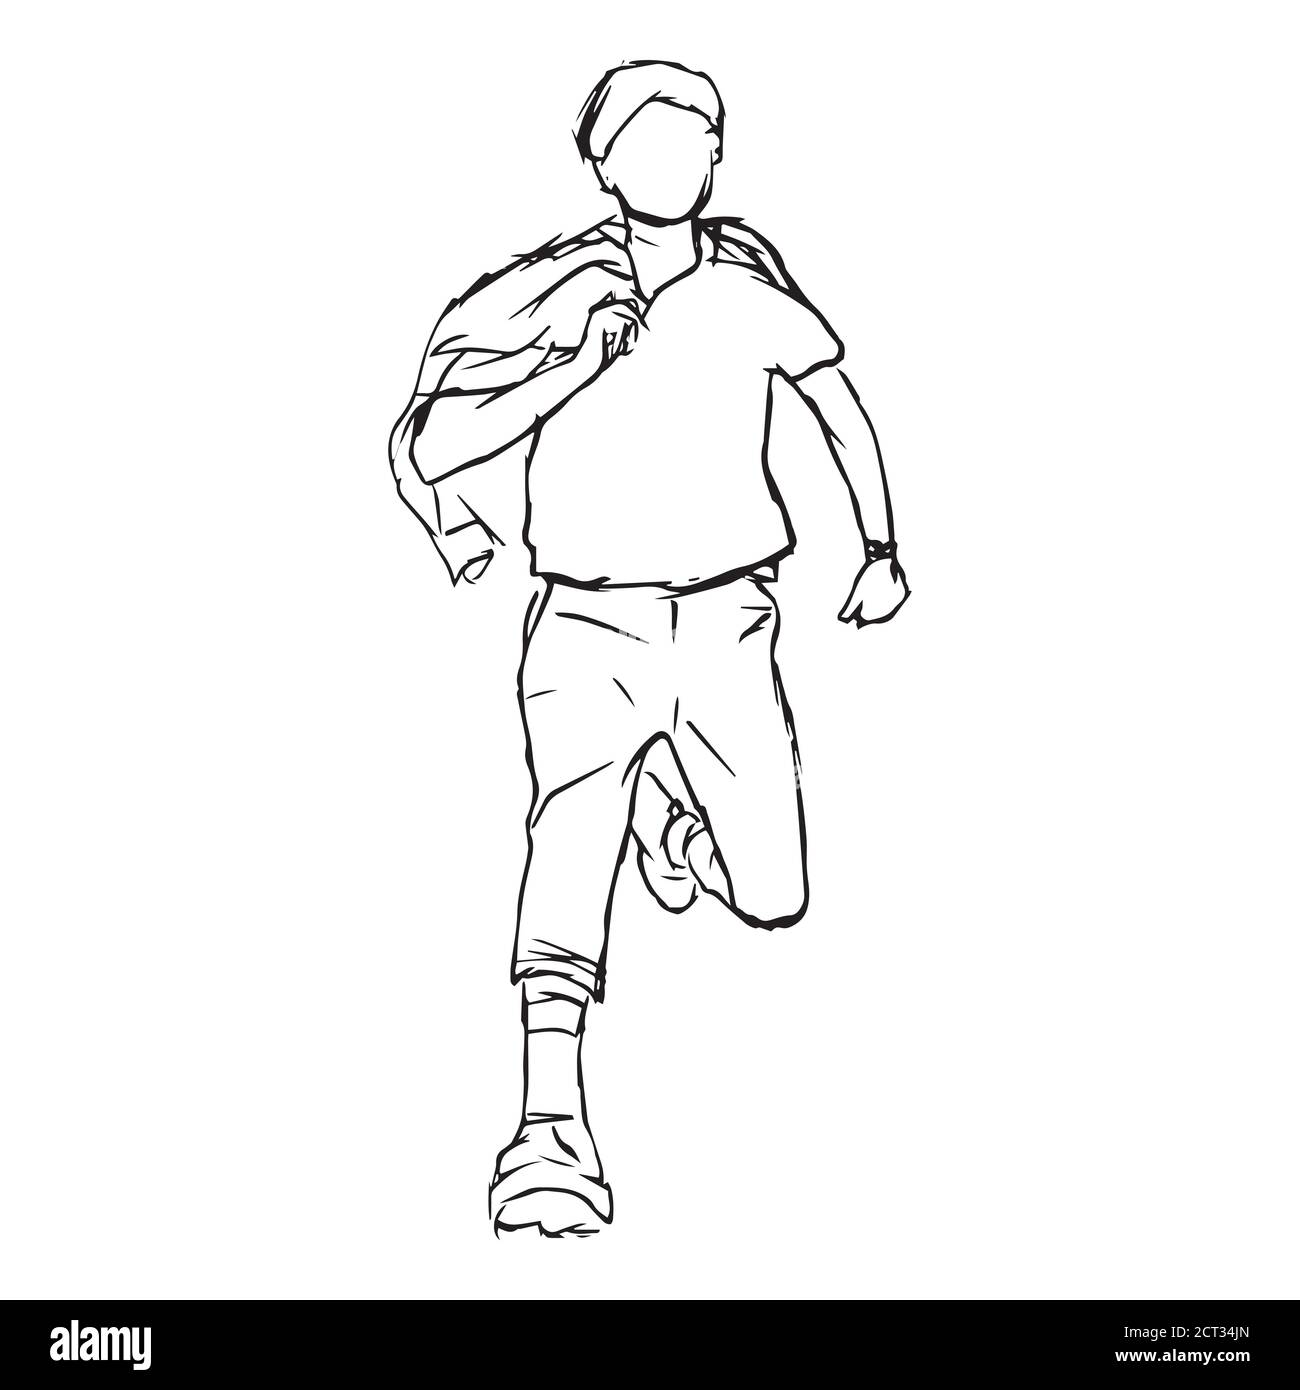 How to Draw a Person Running